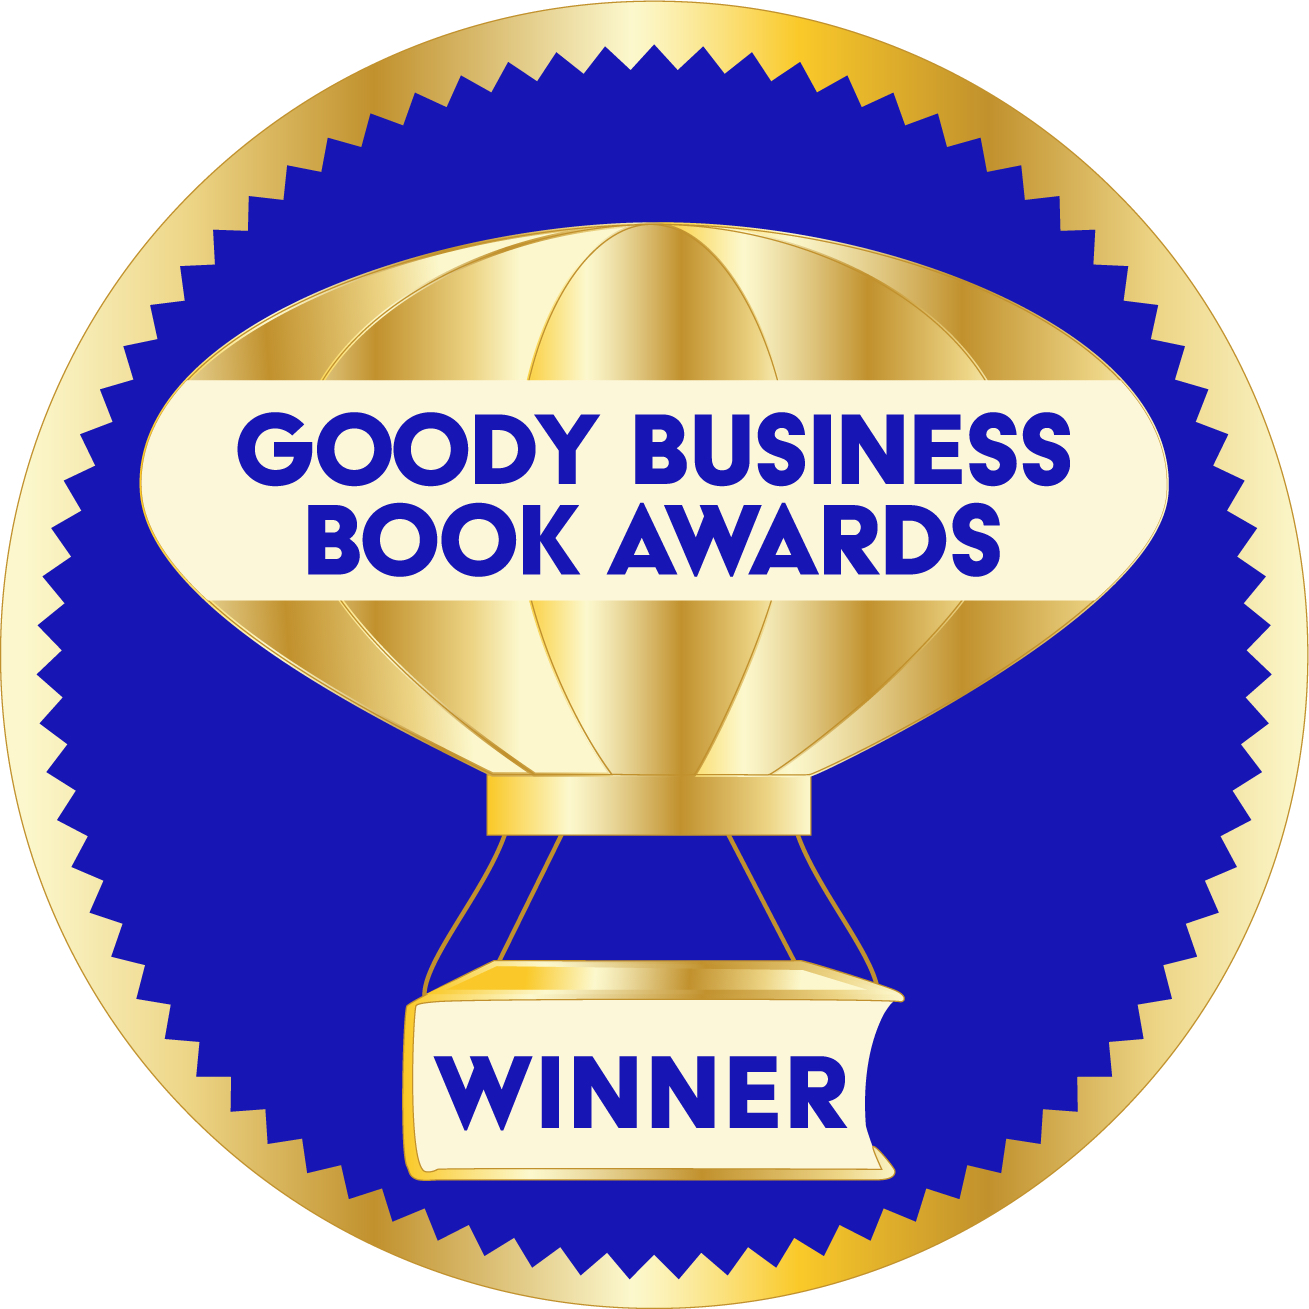 The Annual Goody Business Book Awards honors 100% social impact authors making a difference with words.